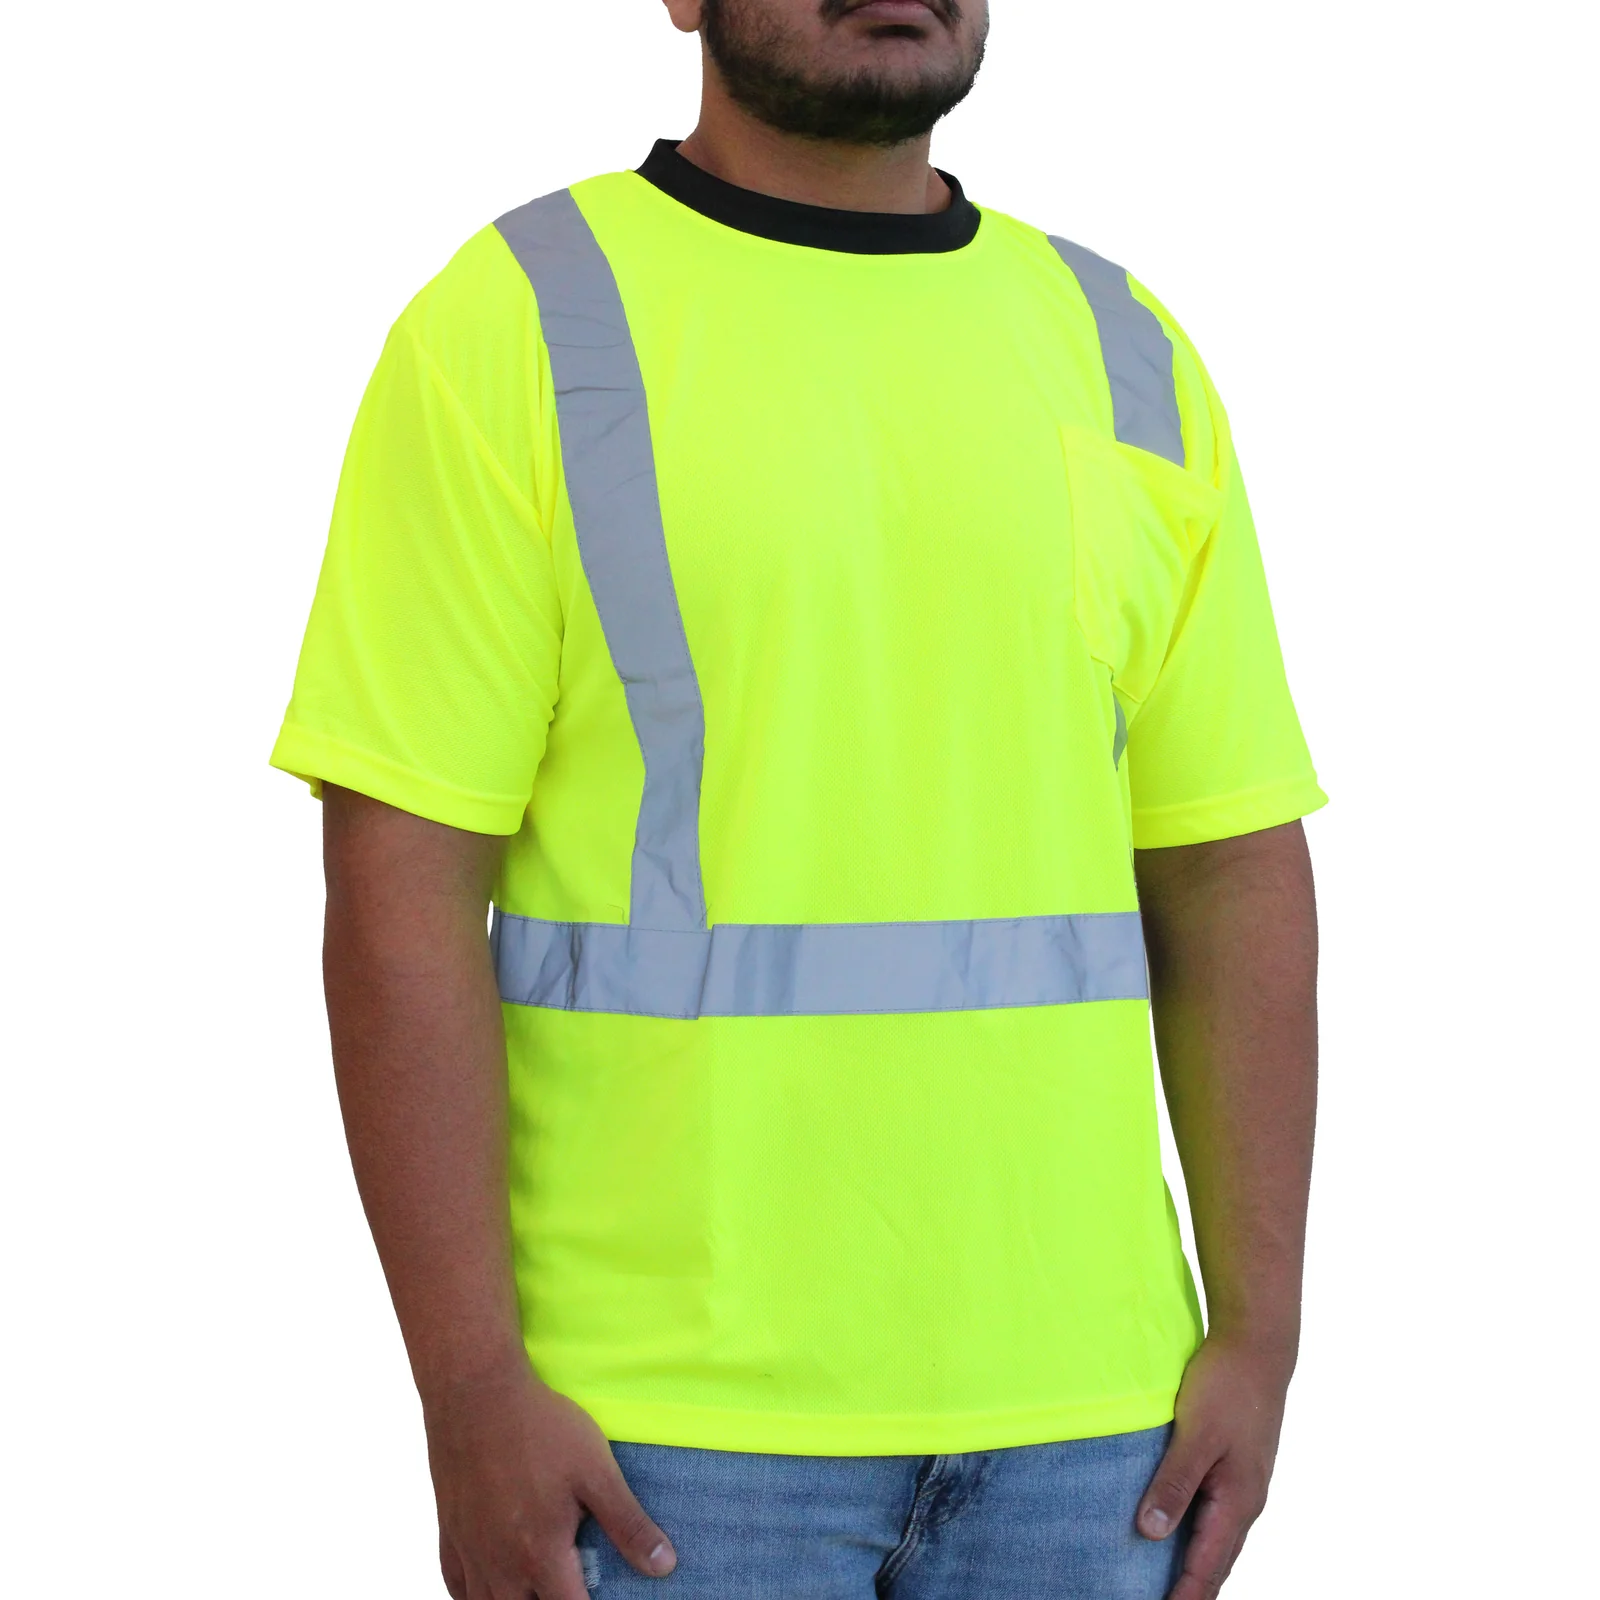 Glow Shield Class 2 Green Safety Shirt, Size XL - High Visibility ...